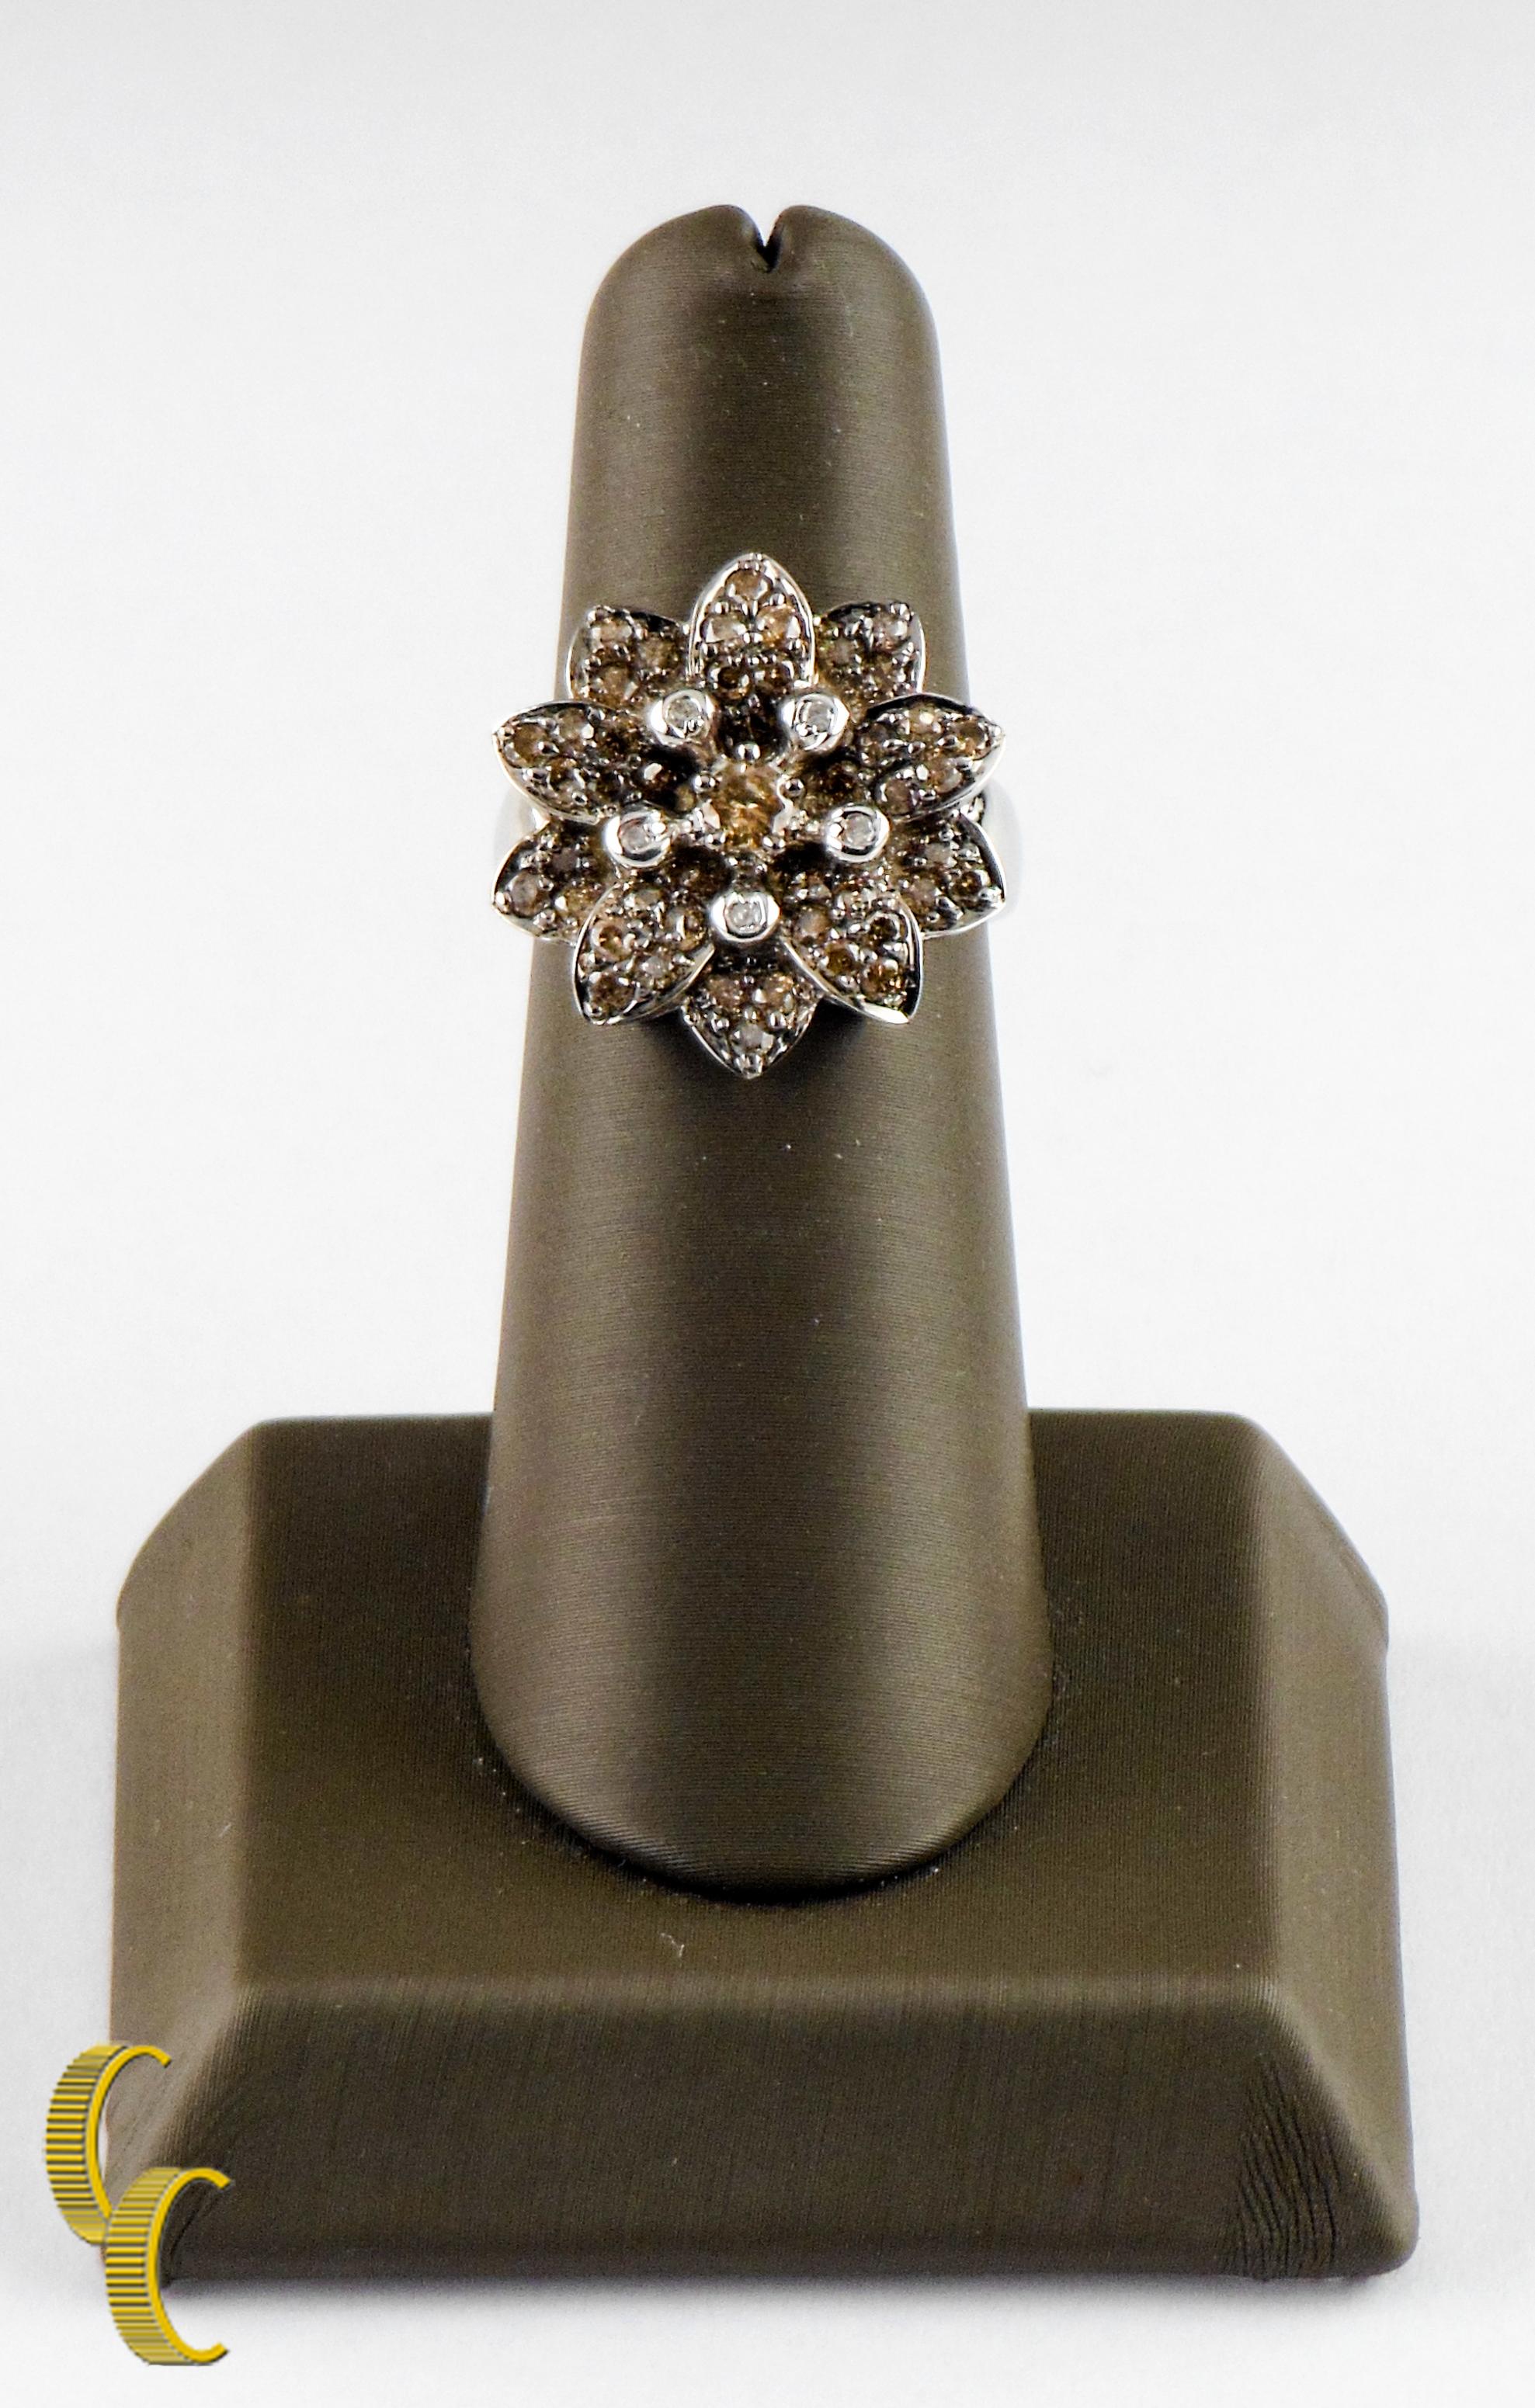 Features round fancy chocolate and white diamonds bead set in a flower setting w/ large round chocolate diamond in center
Ring size 7
Diameter of Flower = Approximately 20 mm
1.22 Carat total weight 
Total mass - 7.1 g
14K white gold 